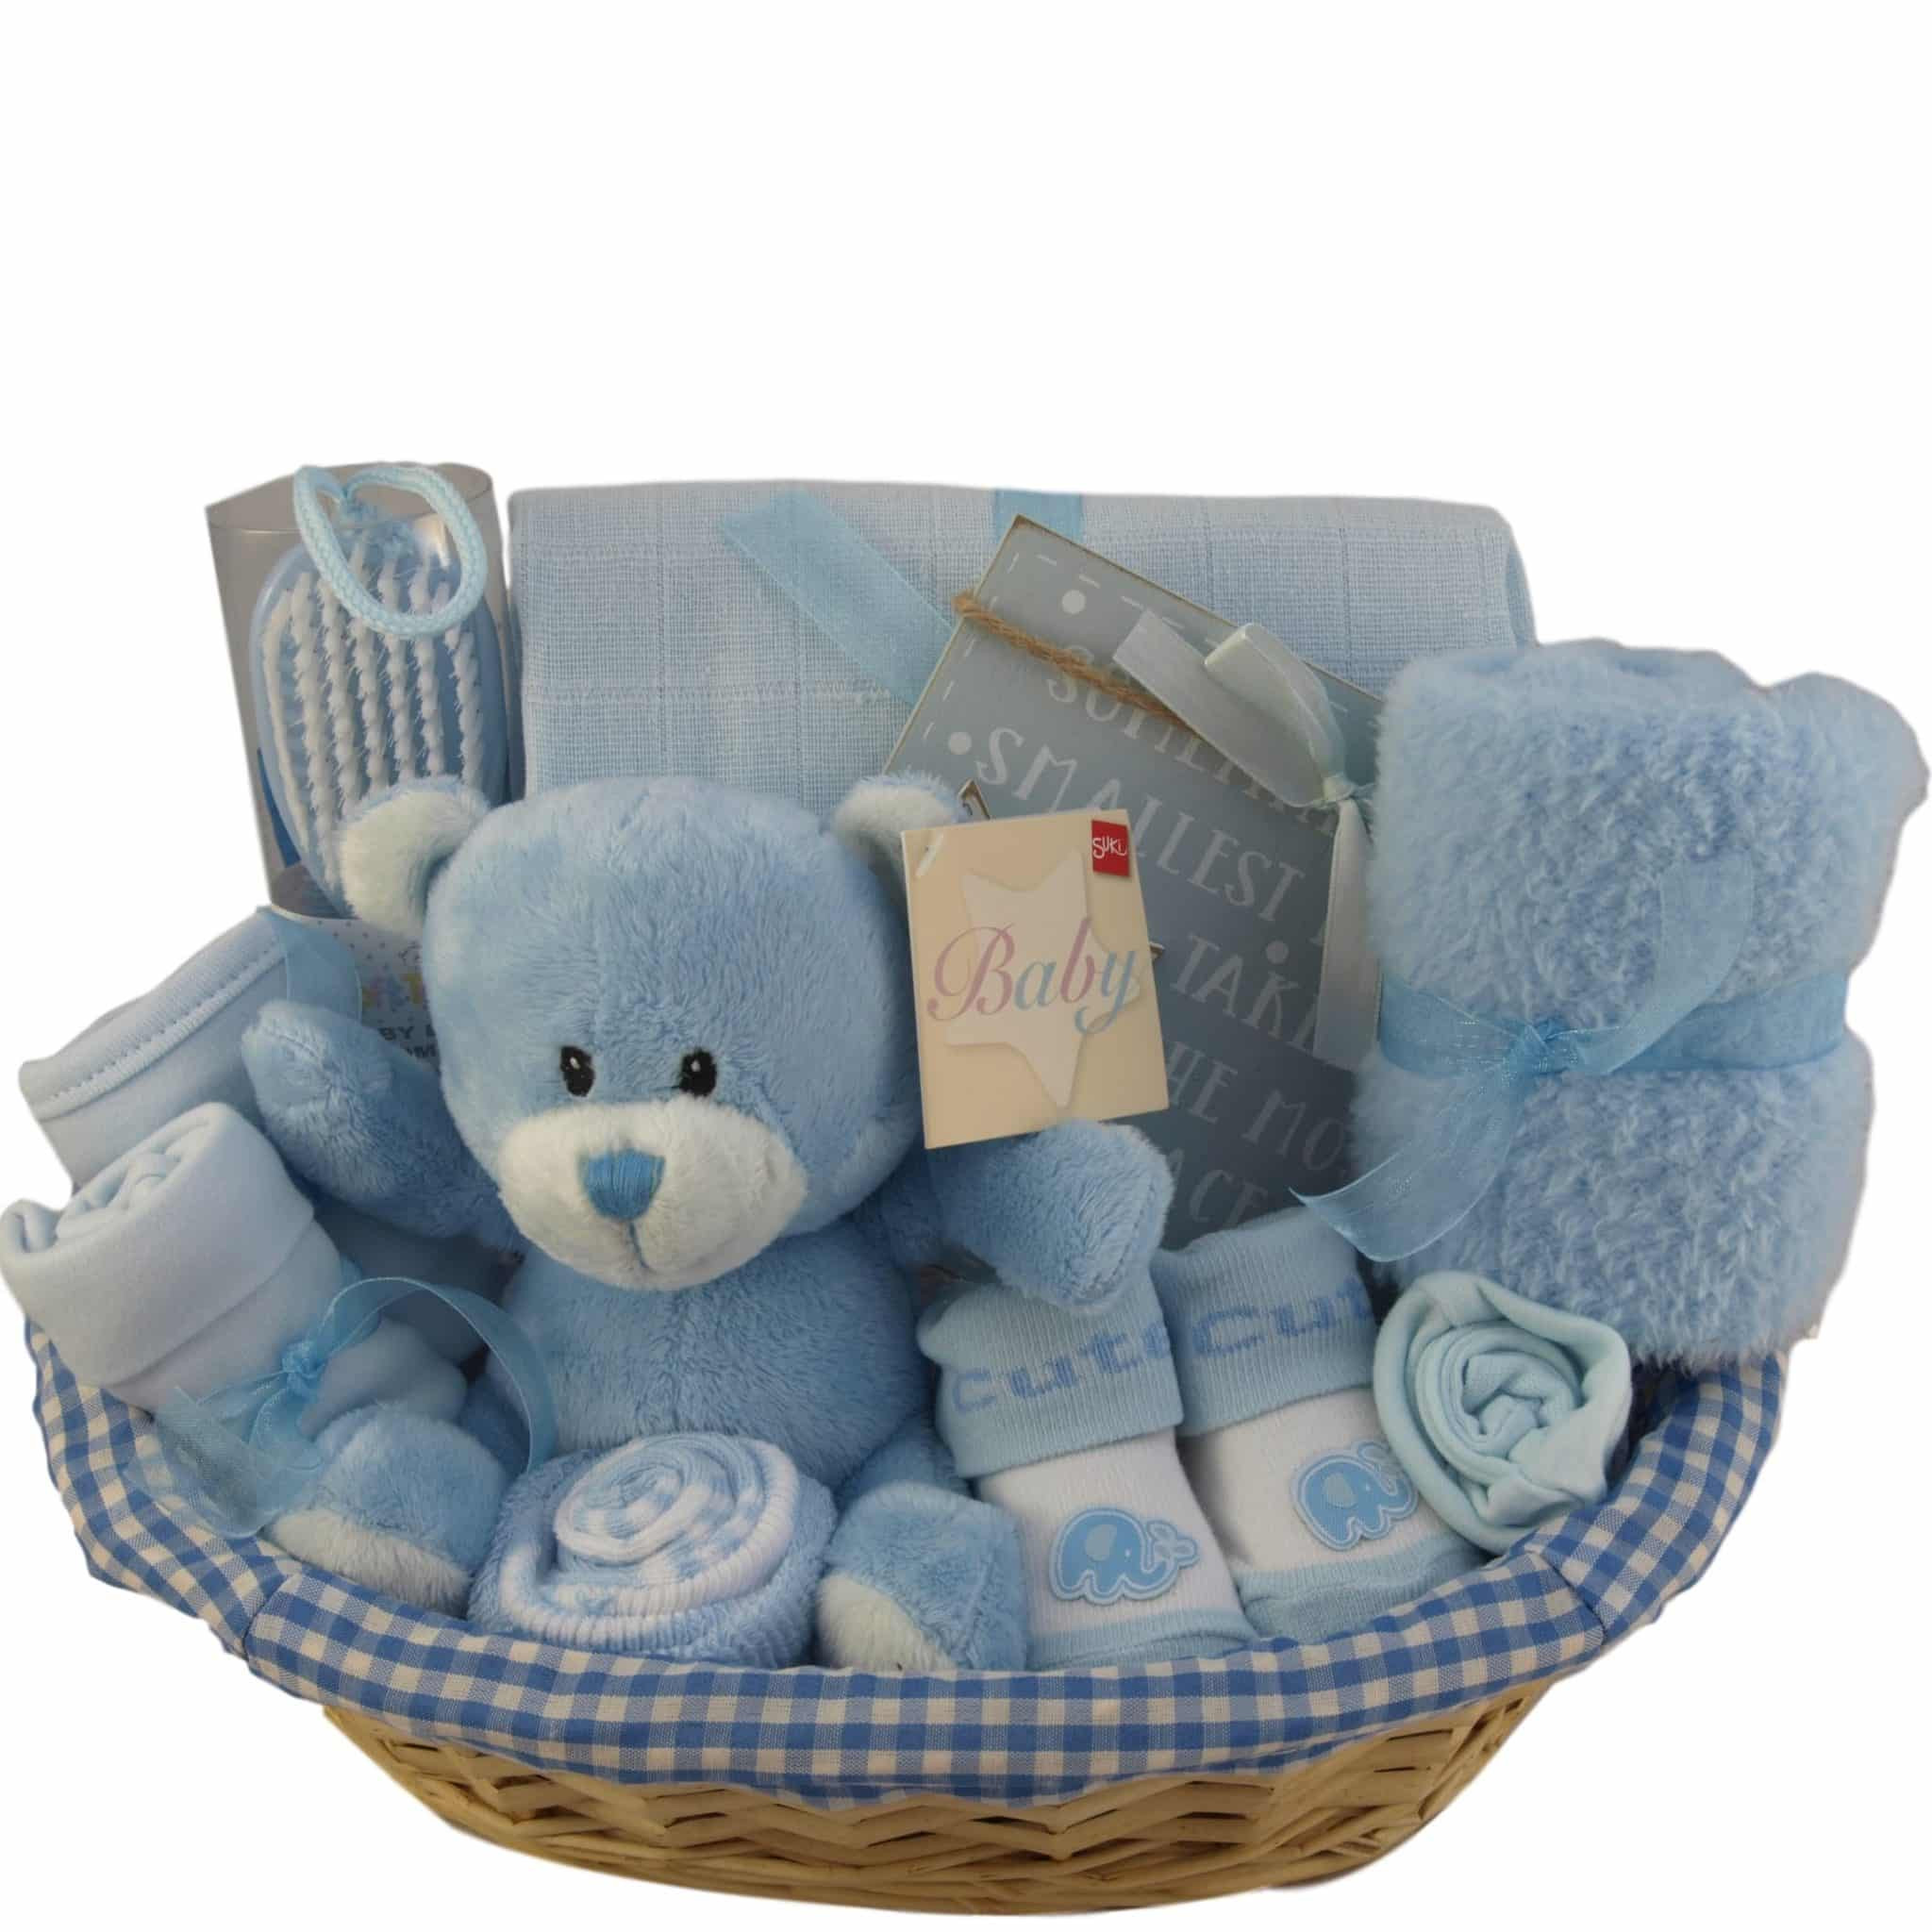 Gifts For Baby Boy
 Sweet Tums 13 Piece Baby Boy Gift Hamper – Baby Hamper Gift